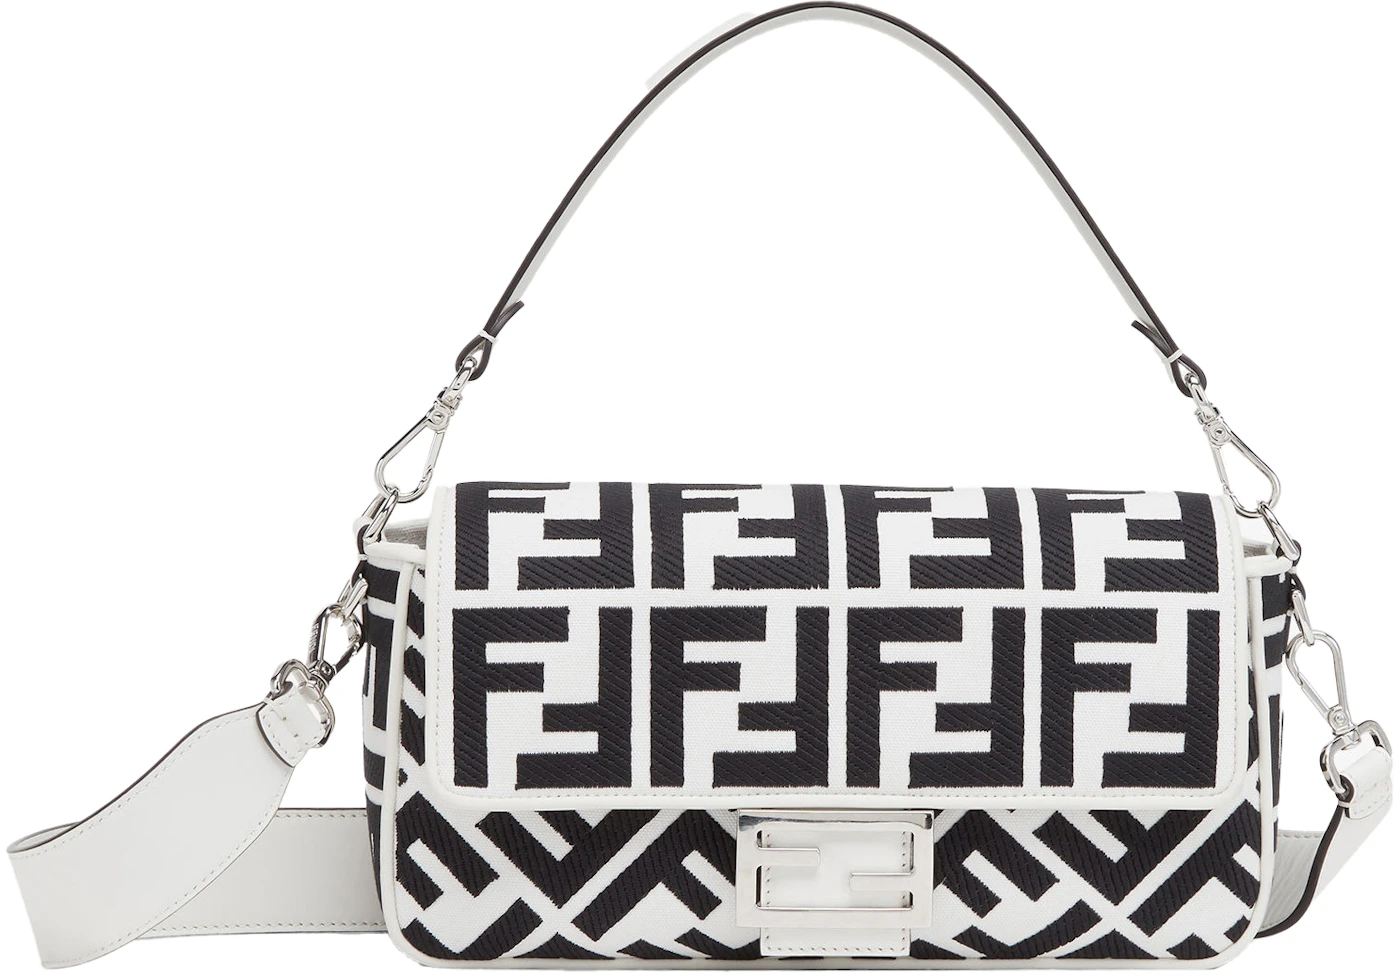 Fendi by Marc Jacobs Baguette White and Black Canvas Bag with FF